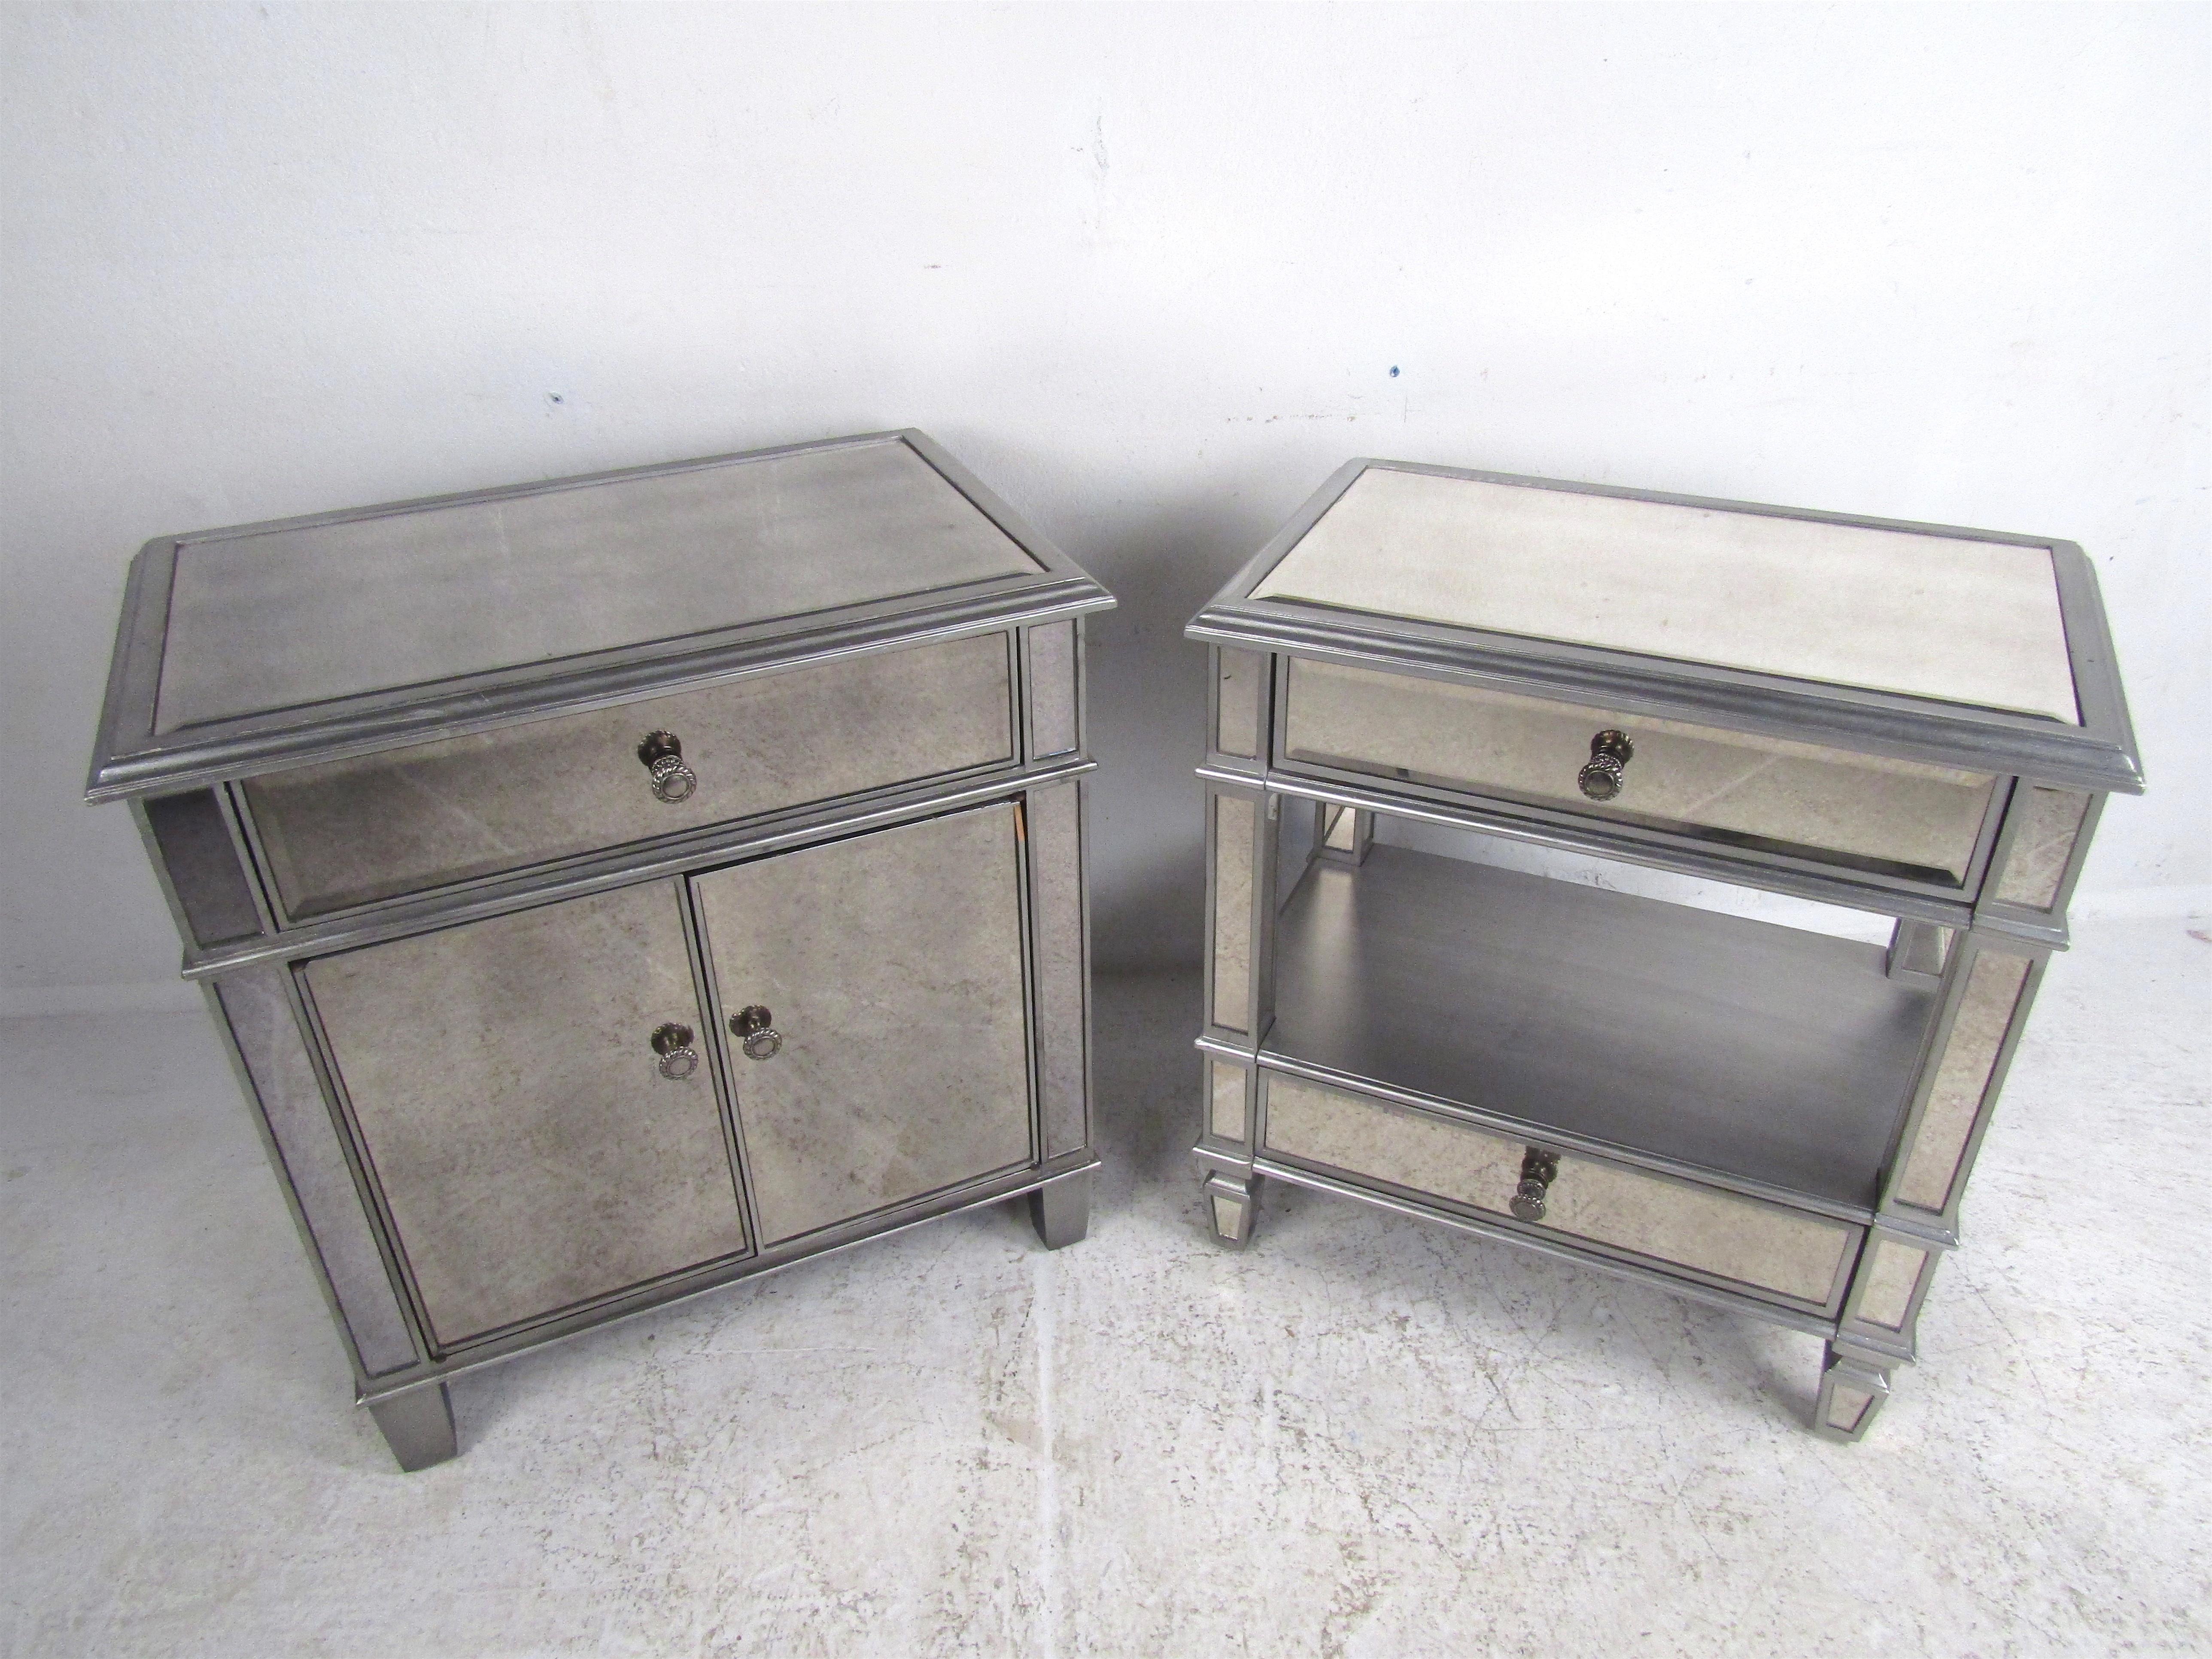 The beautiful pair of side tables features two different unique designs, both with a mirrored finish. One has a larger storage space with two doors and a pullout / pull-out drawer while the other has one pullout / pull-out drawer and an open space